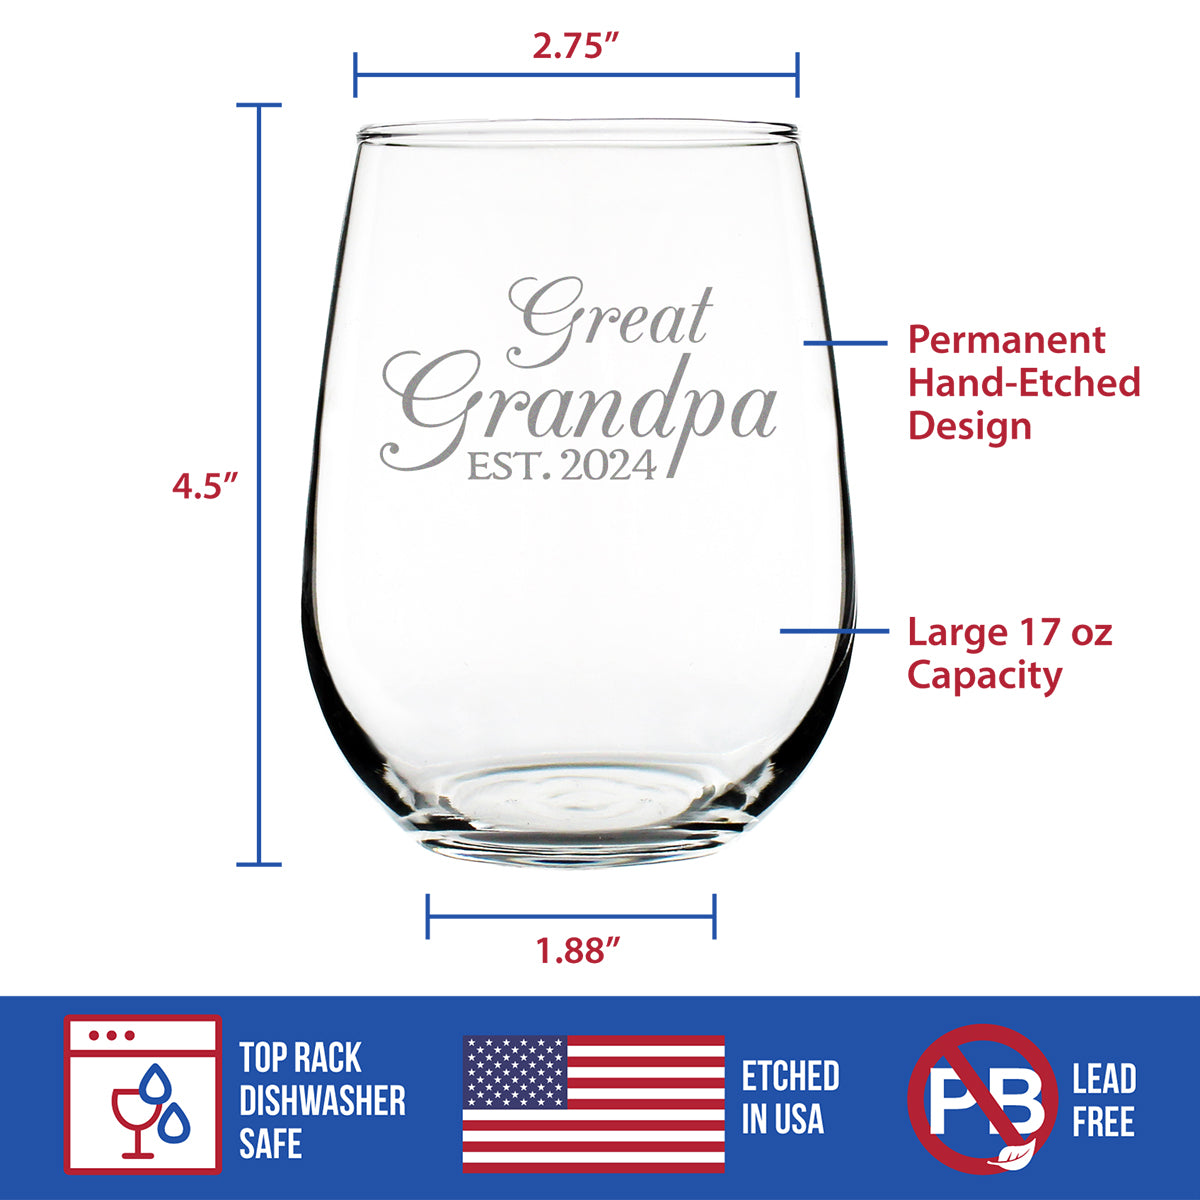 Great Grandpa Est 2024 - New Great Grandfather Stemless Wine Glass Gift for First Time Great Grandparents - Decorative 17 Oz Large Glasses